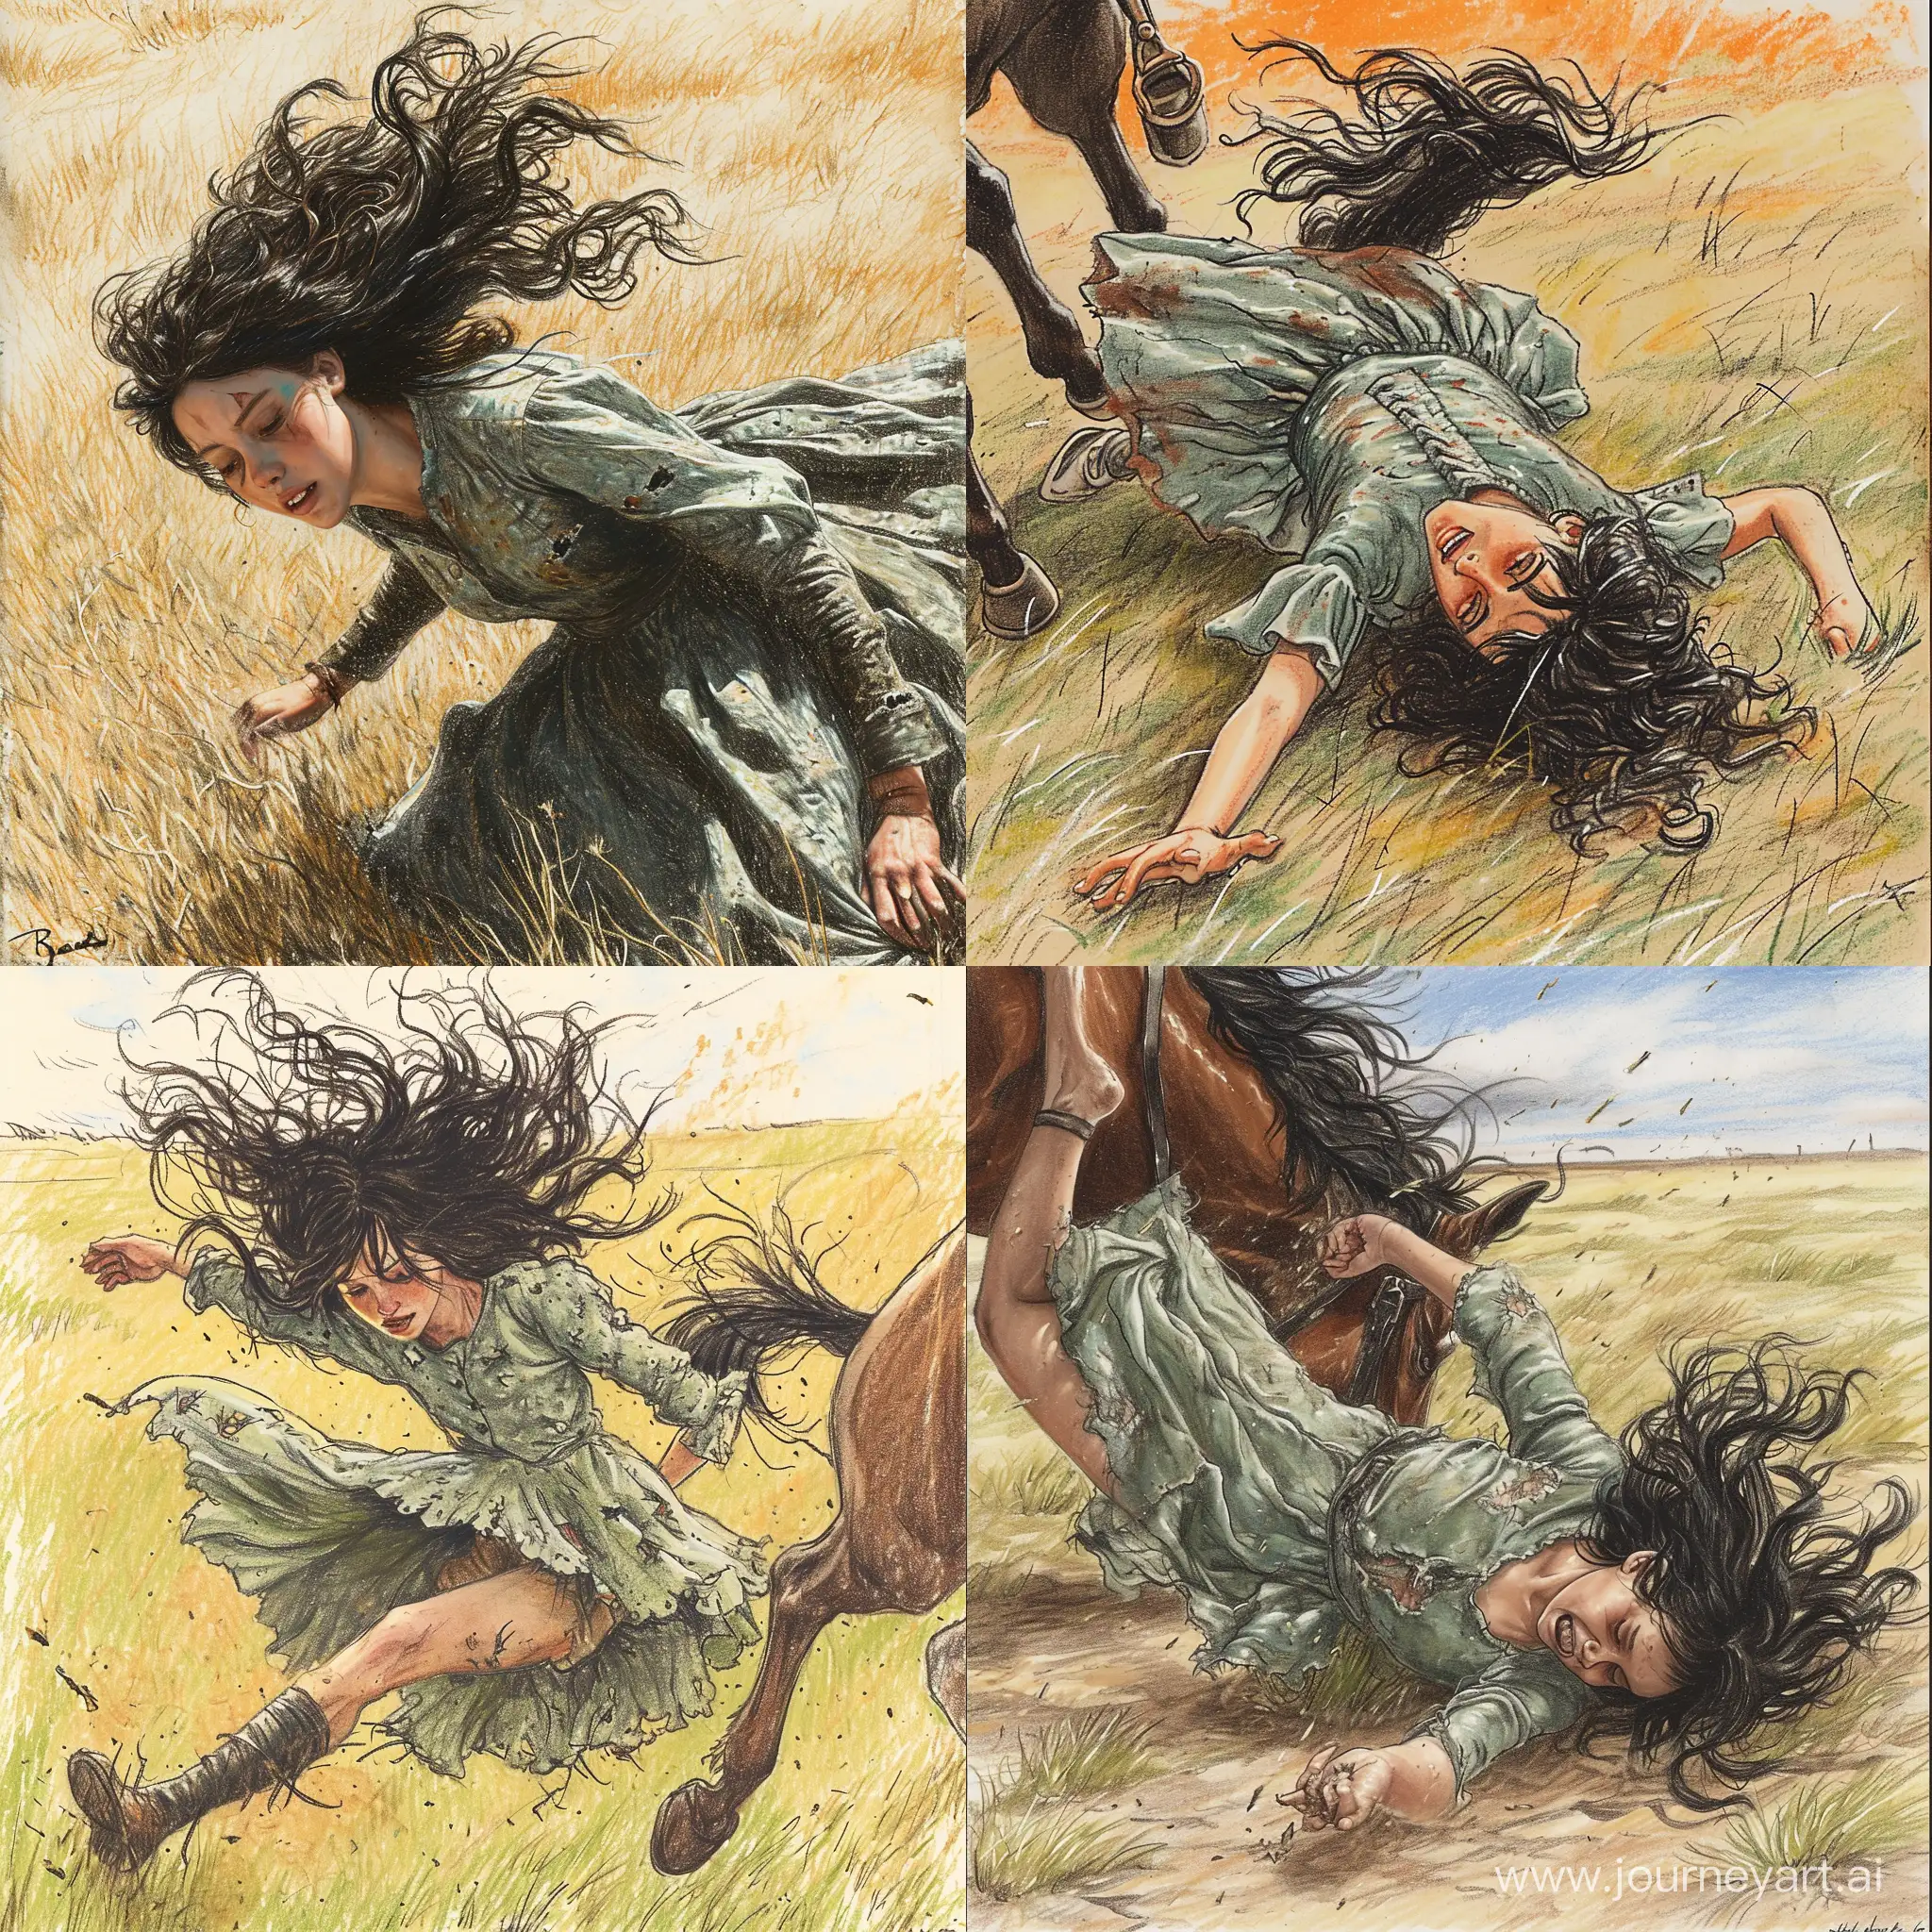 eight year girl in a green-gray bad broken dress, with black wavy hair, falls from a horse, drawn in color pencil, sunny, a field of grass,She fell off her horse, the horse is clearly visible